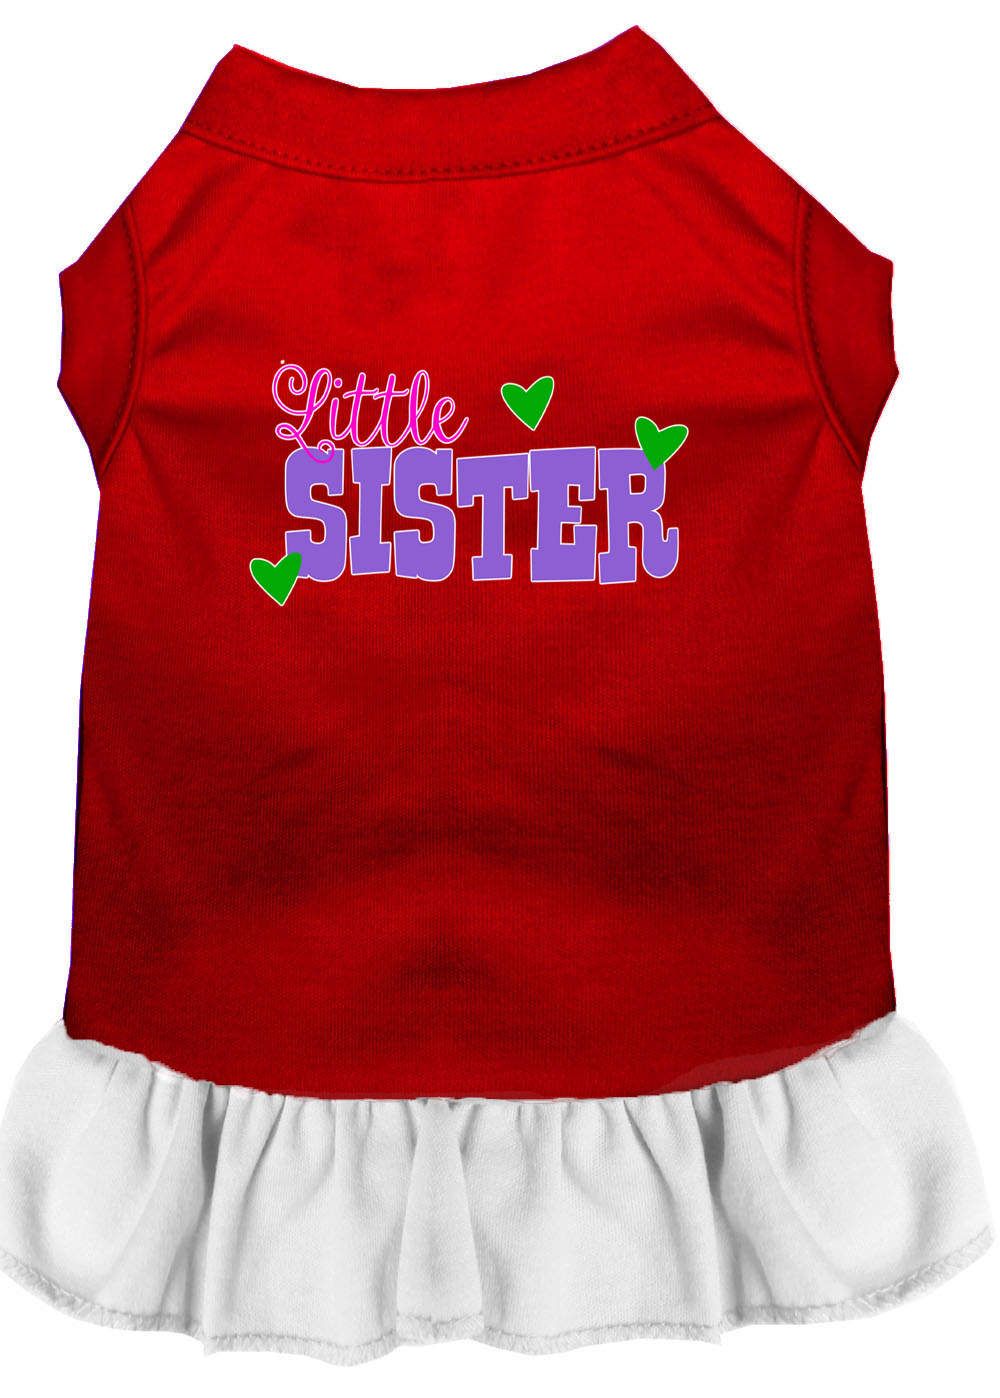 Little Sister Screen Print Dog Dress Red with White XL